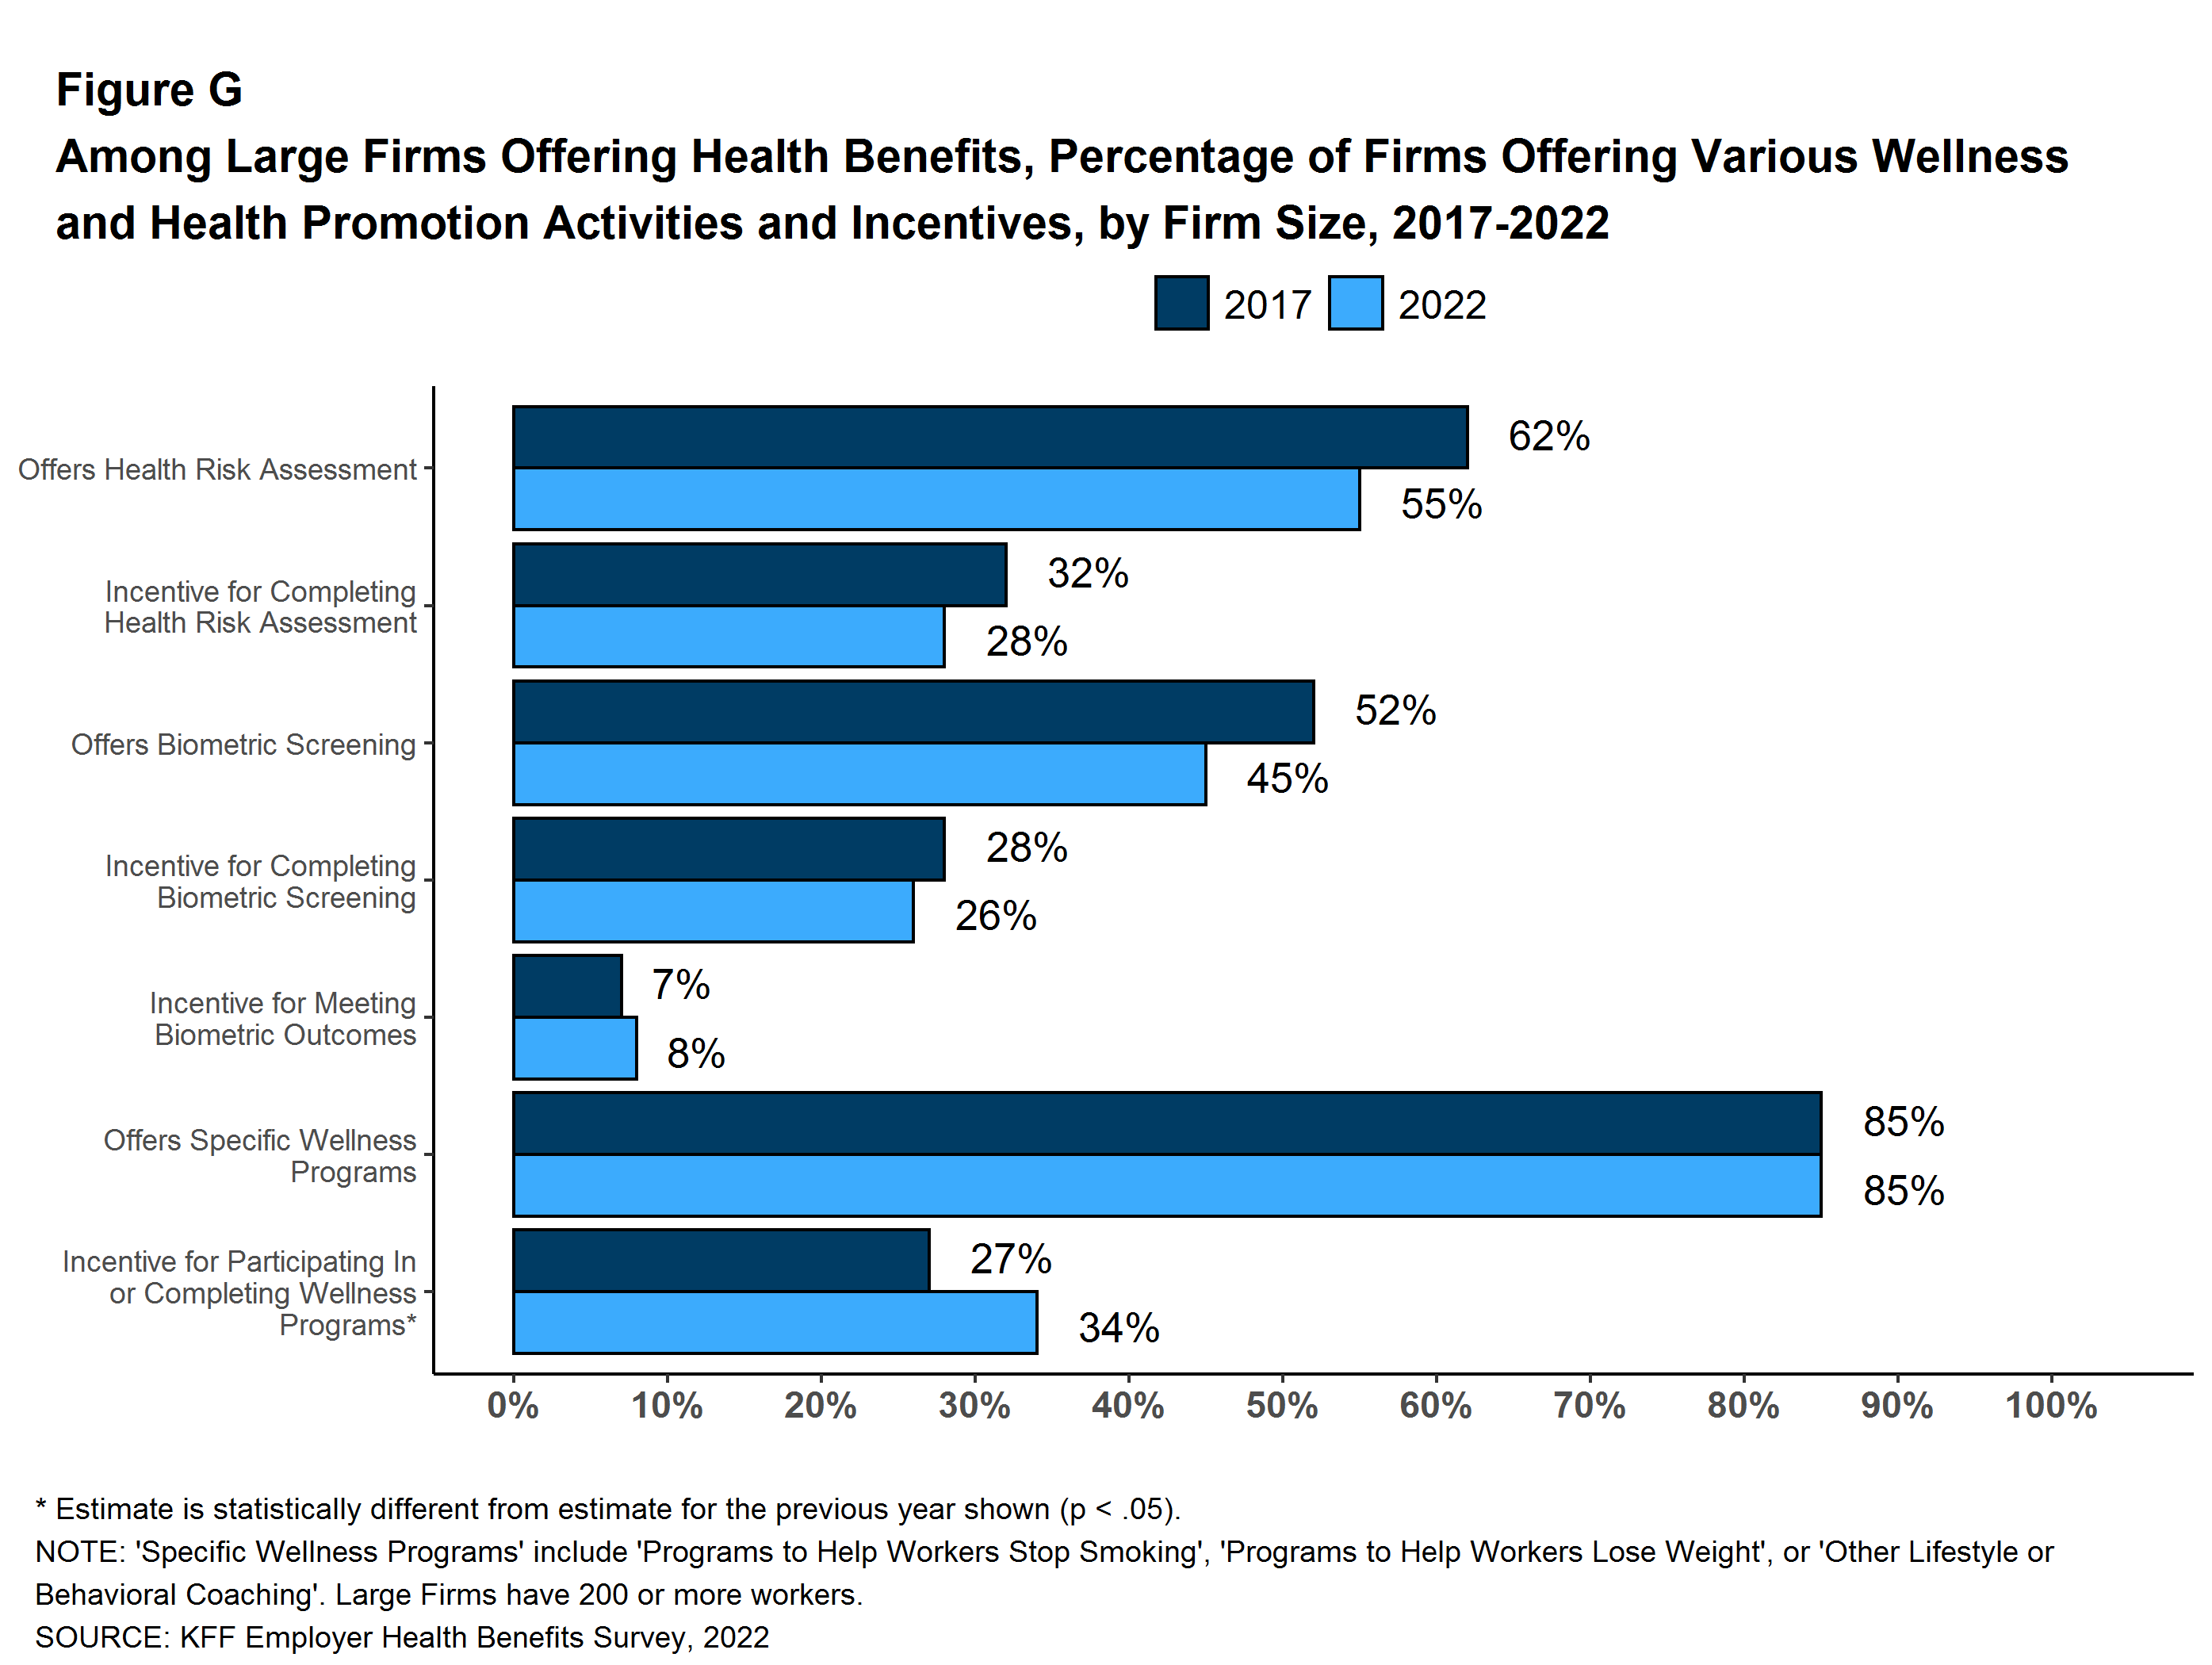 Among Large Firms Offering Health Benefits, Percentage of Firms